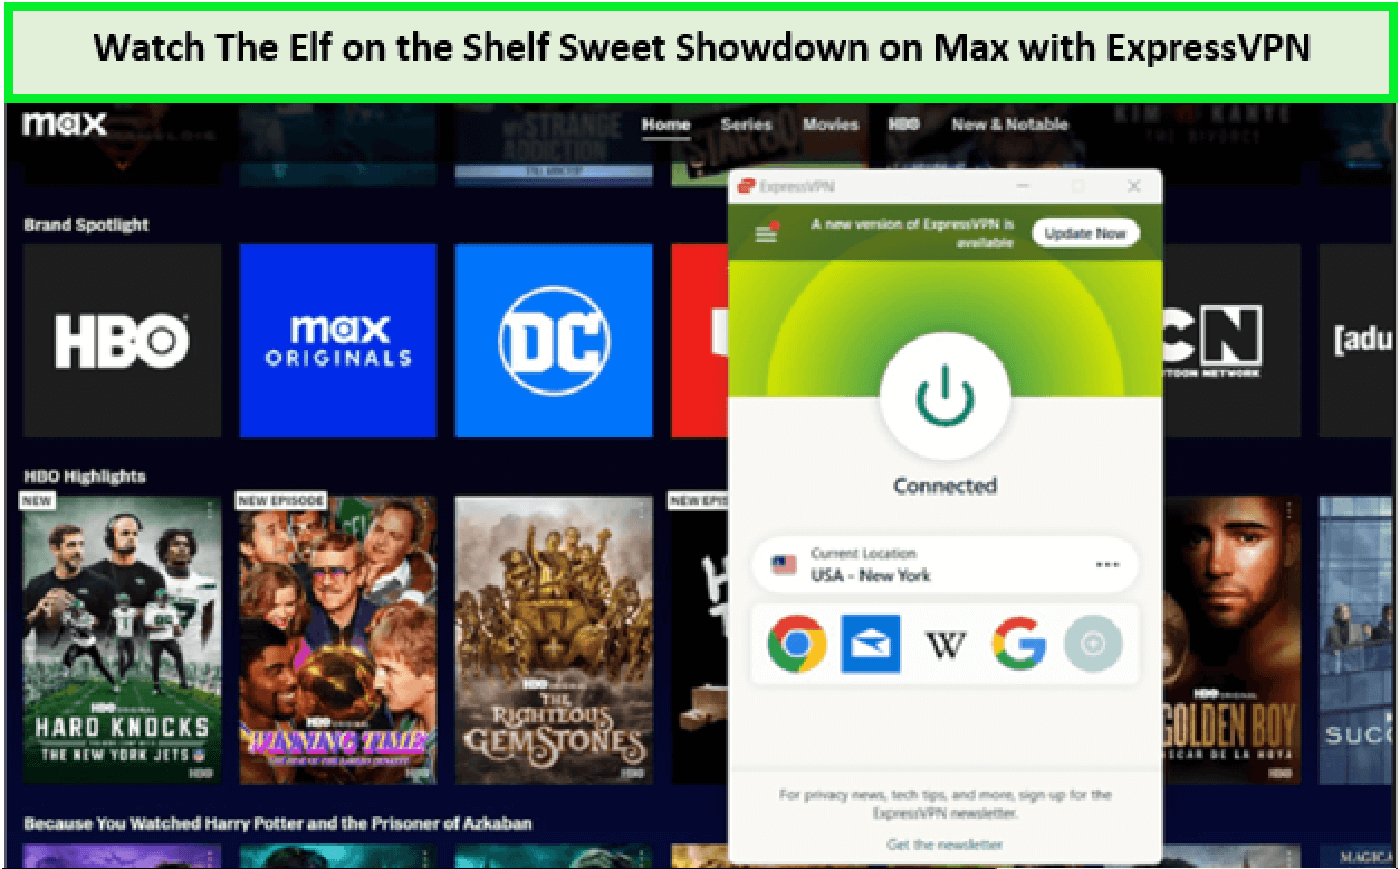 Watch-The-Elf-on-the-Shelf-Sweet-Showdown-in-India-on-Max-with-ExpressVPN